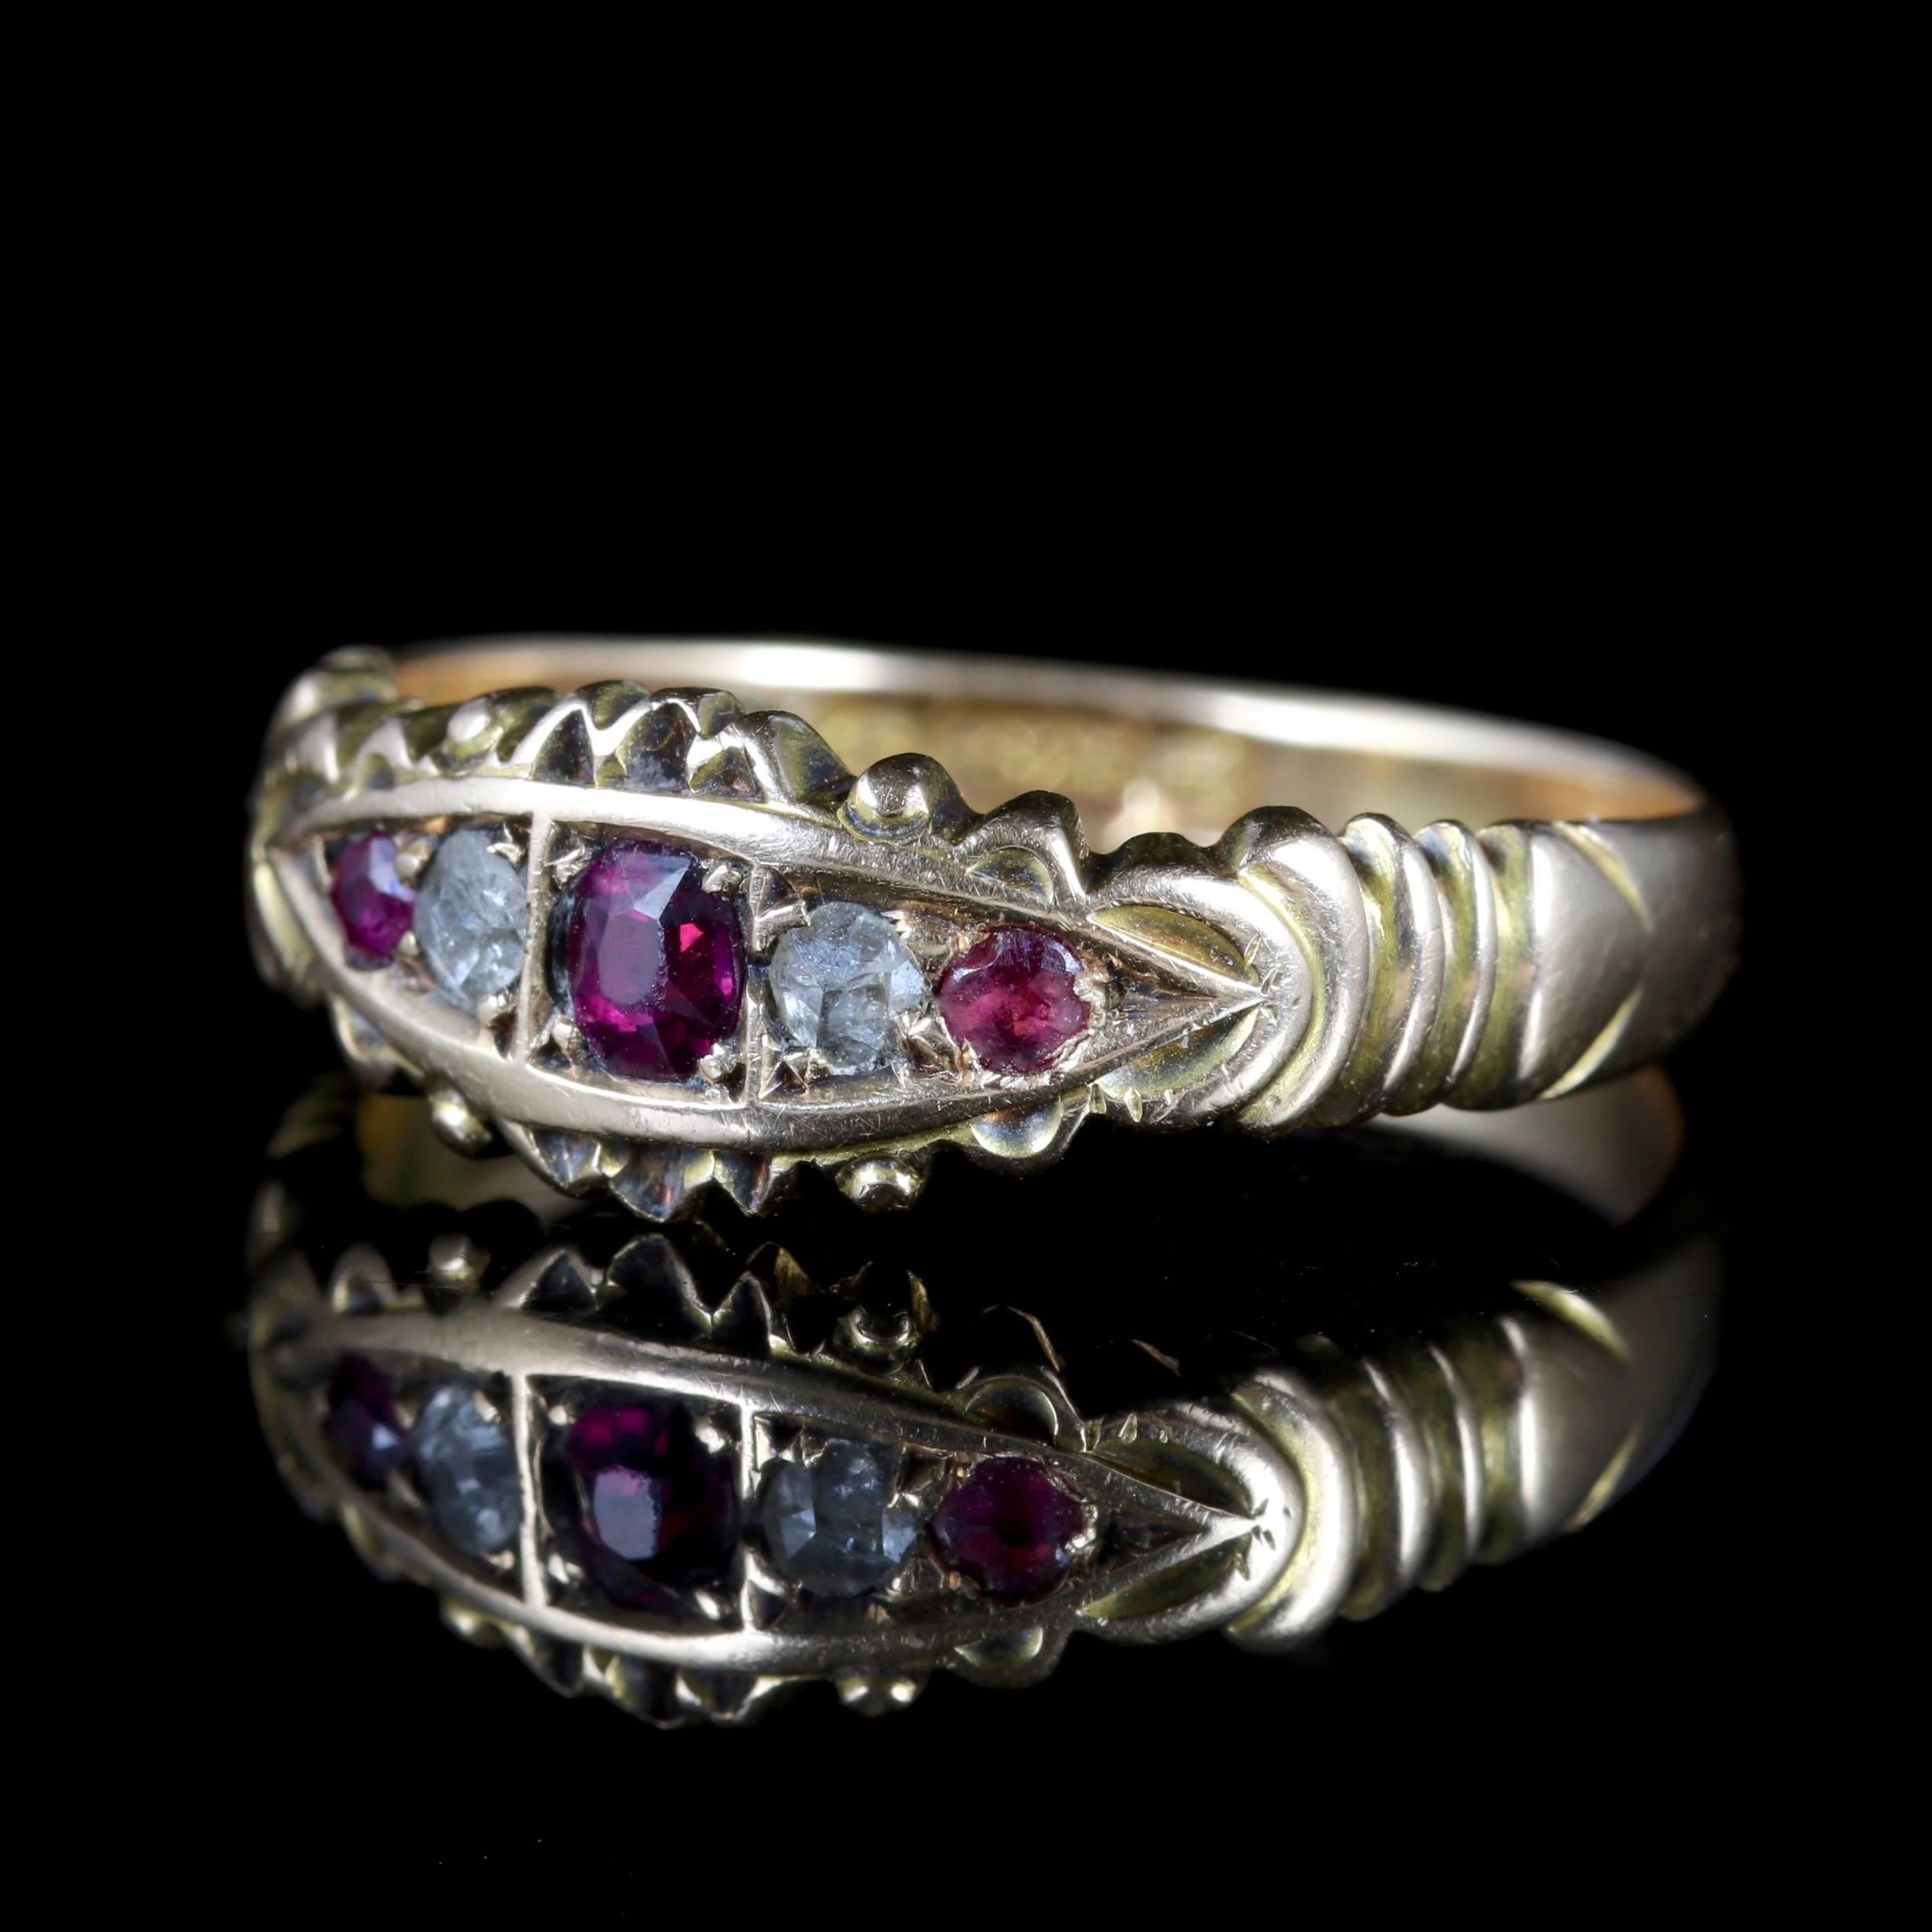 This Victorian 15ct Yellow Gold ring is set with Rubies and Diamonds, Circa 1901.

The ring boasts 0.70ct of beautiful, rich pink Rubies.

The Ruby is considered to be the most powerful gem in the universe, and is associated with many astral signs.